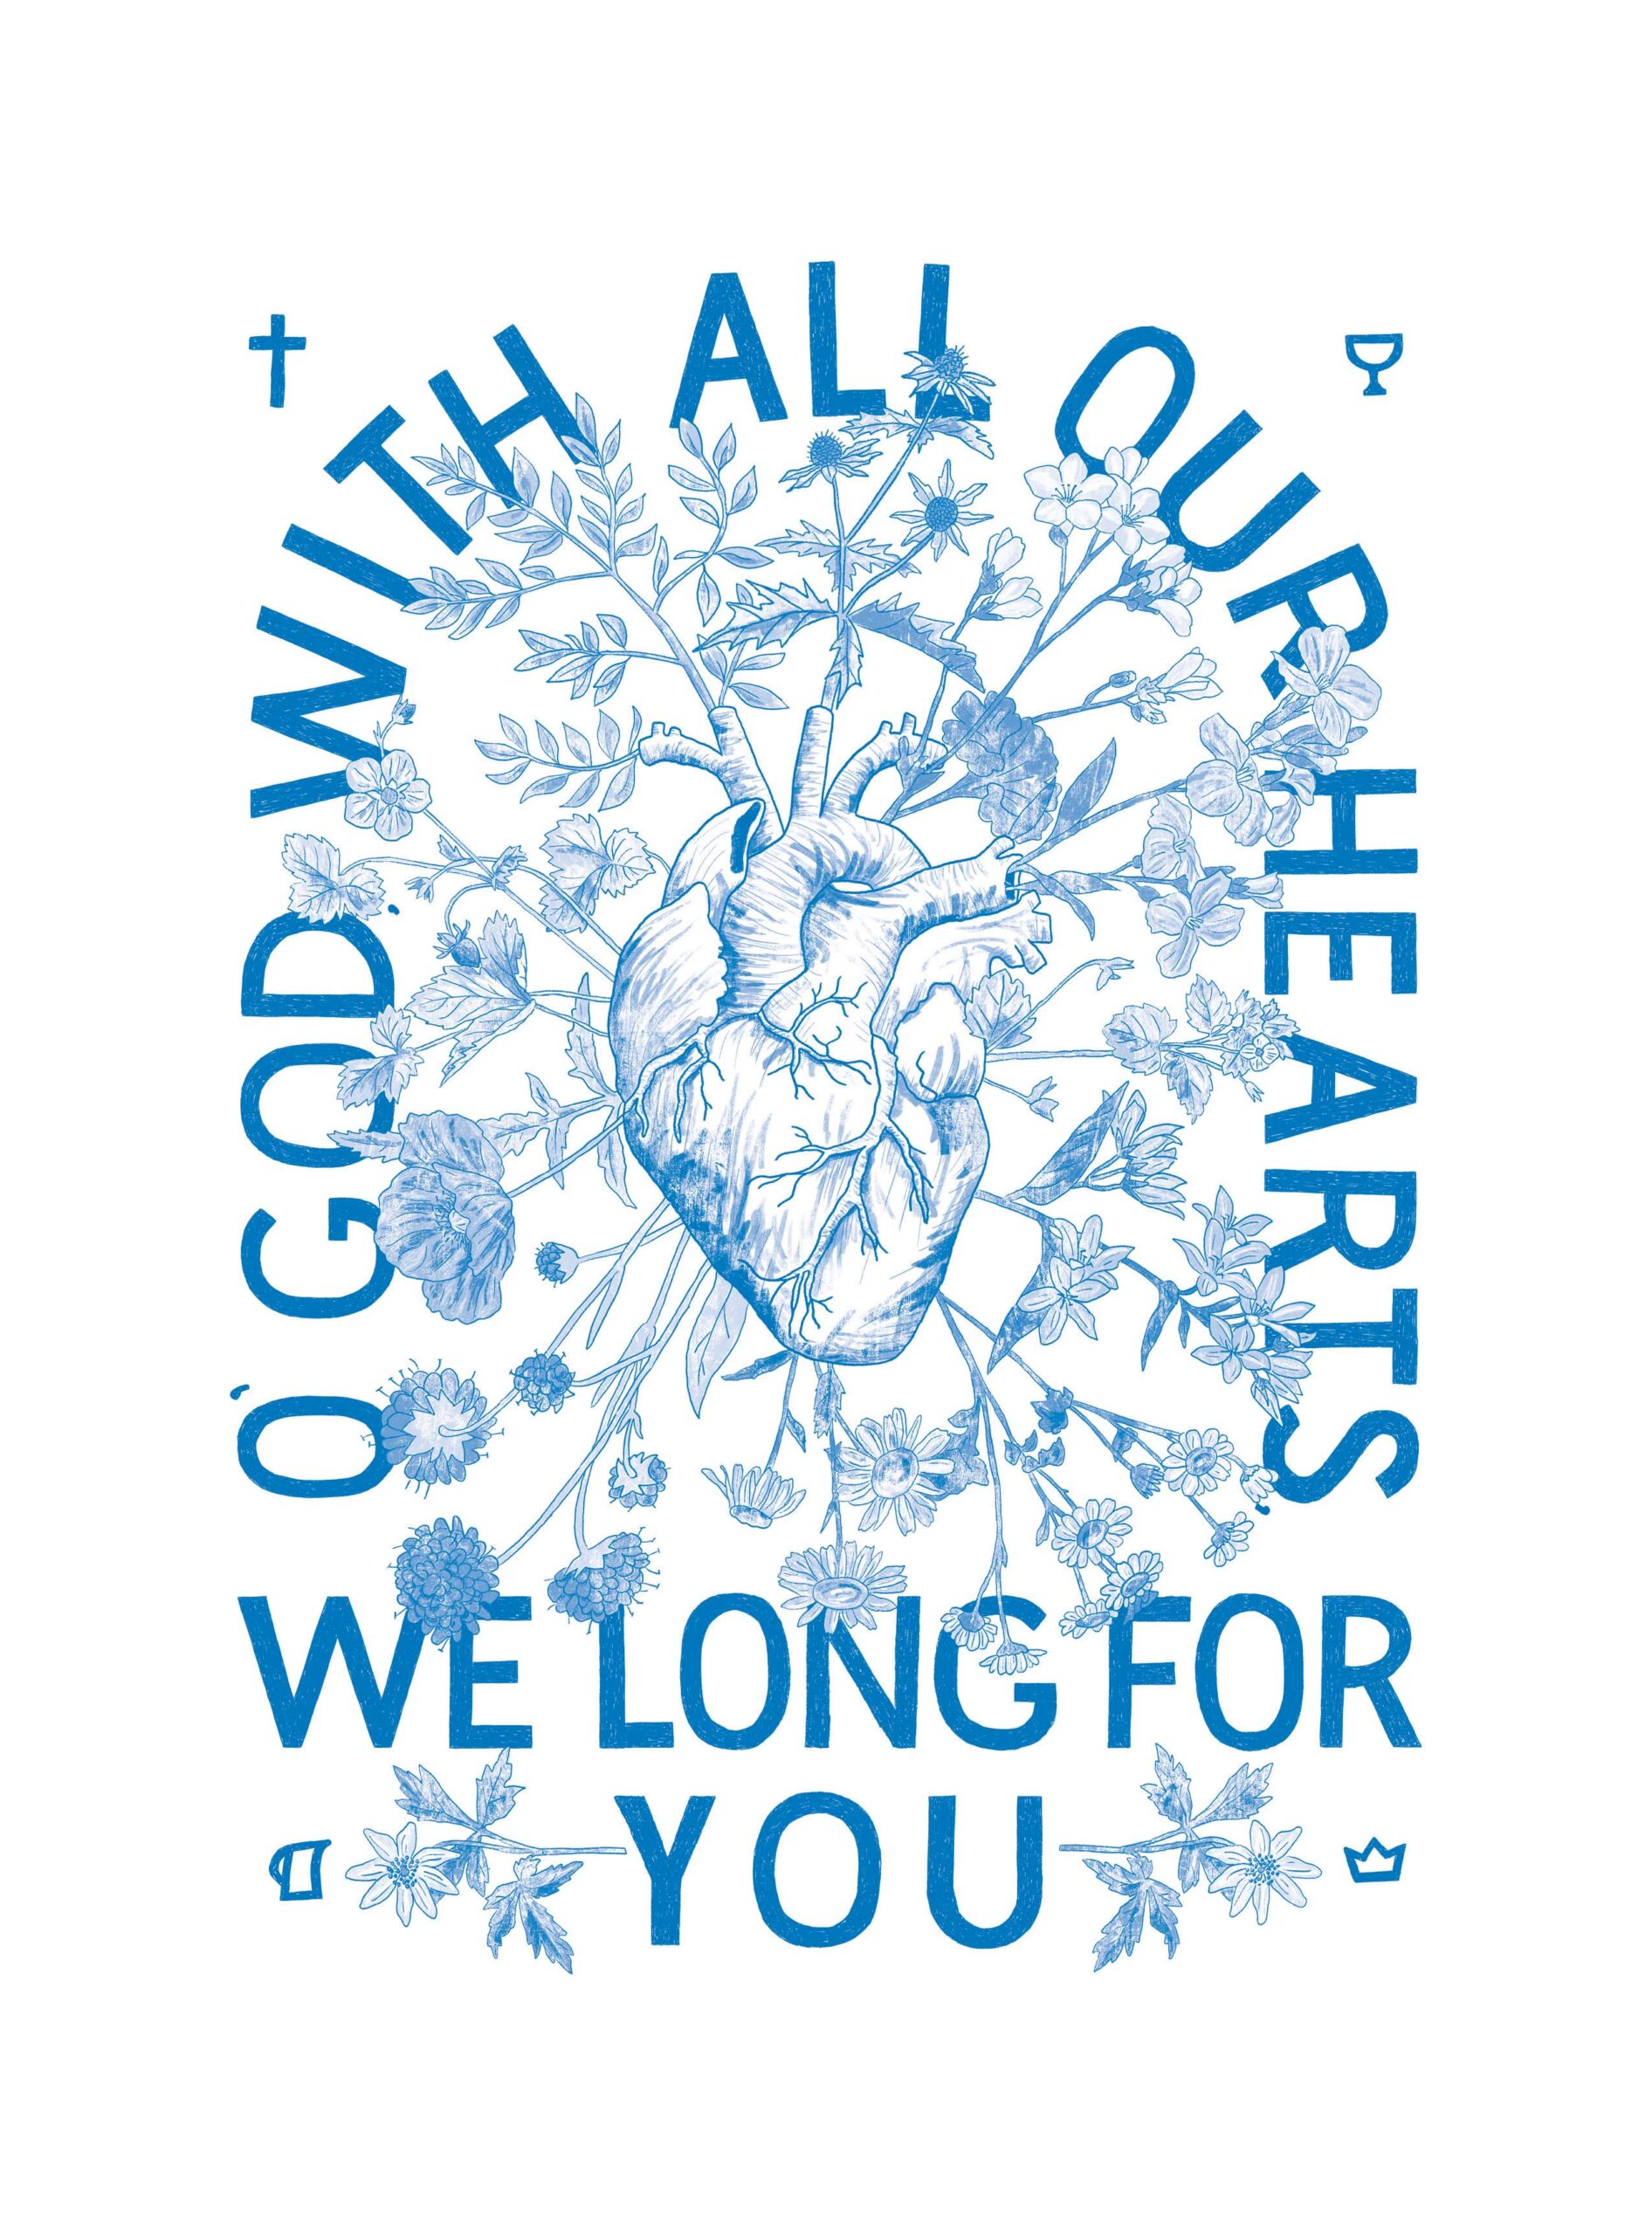 The Alliance Canada Vision Prayer. Hand lettered illustration of a heart with flowers growing from it that reads O God, with all our hearts we long for you.